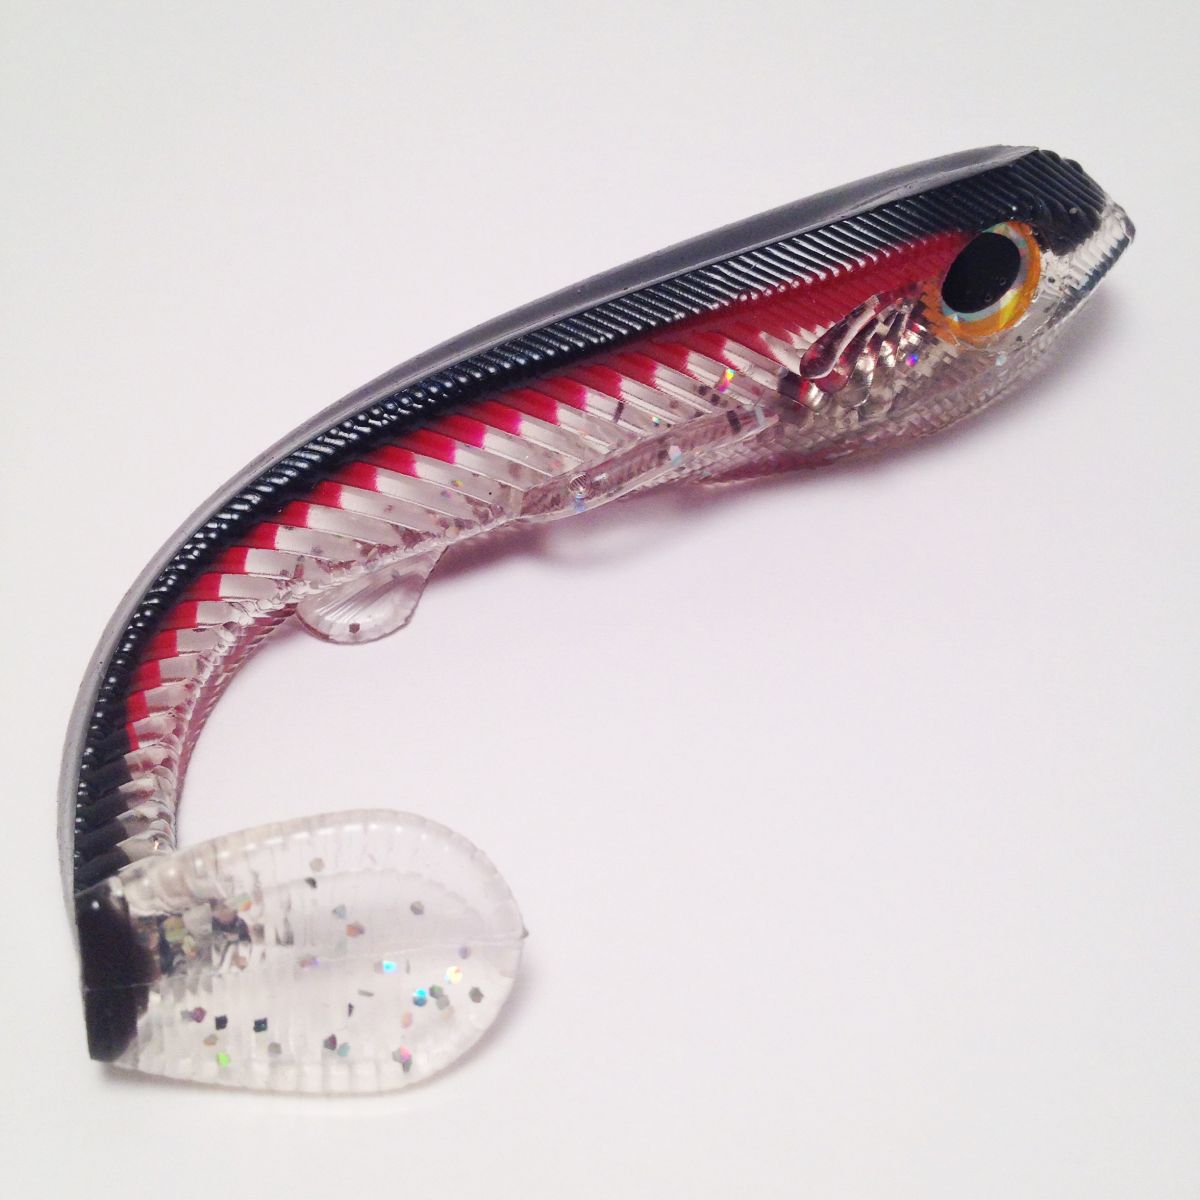 Stunned Mullet - Soft Baits -  - Tackle Building Forums